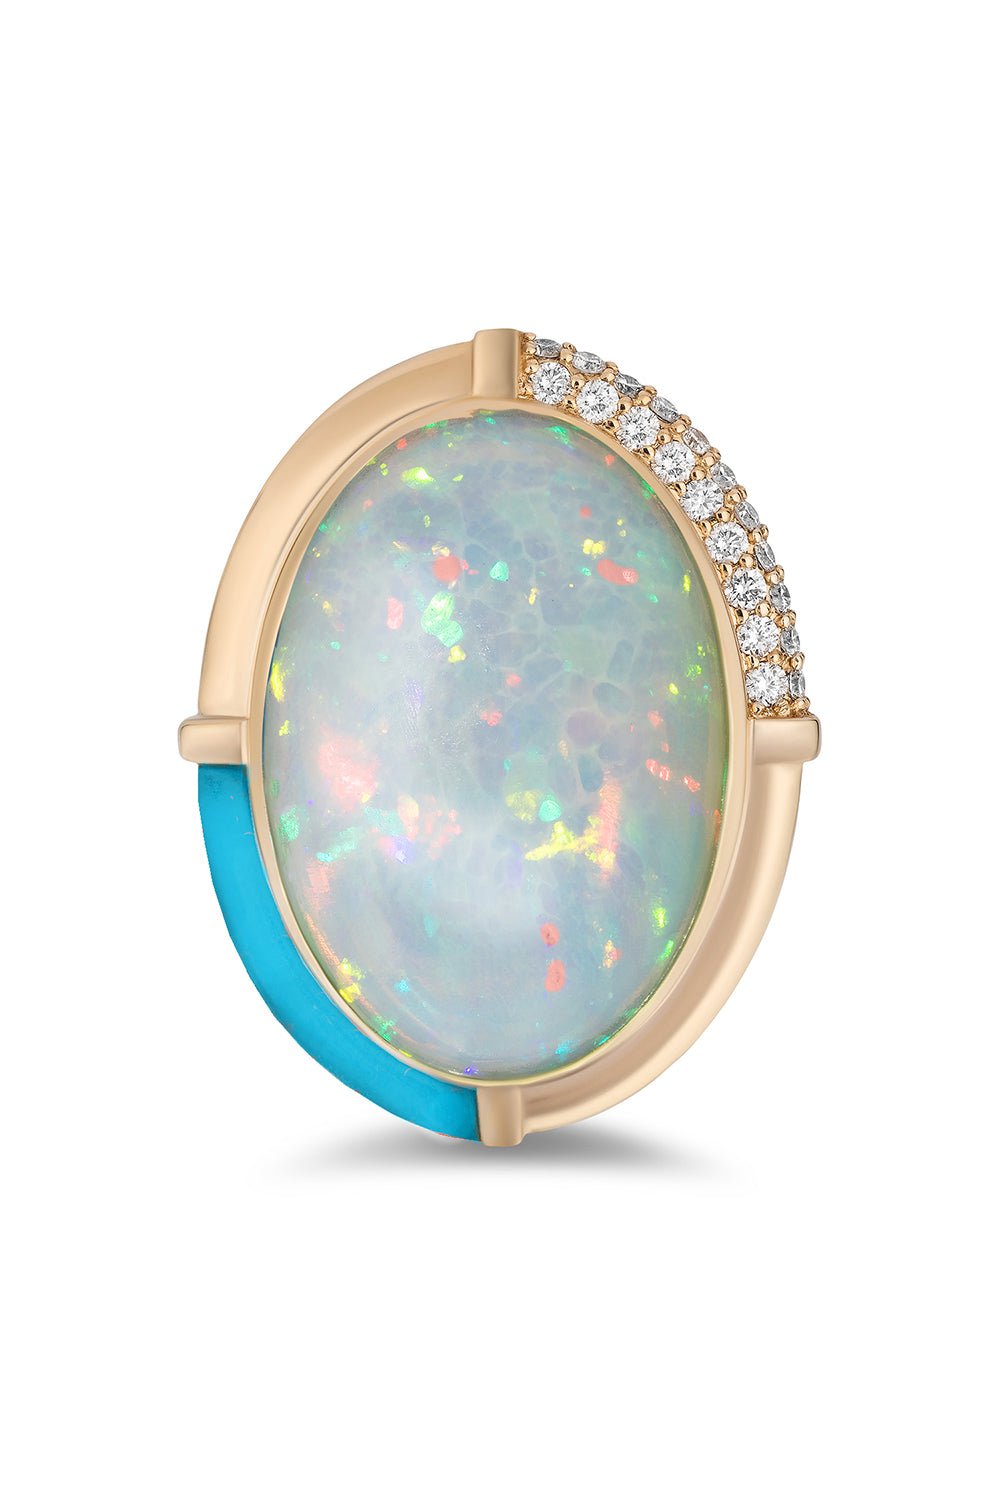 MASON & BOOKS-Turquoise Sugar And Spice Cocktail Ring-YELLOW GOLD